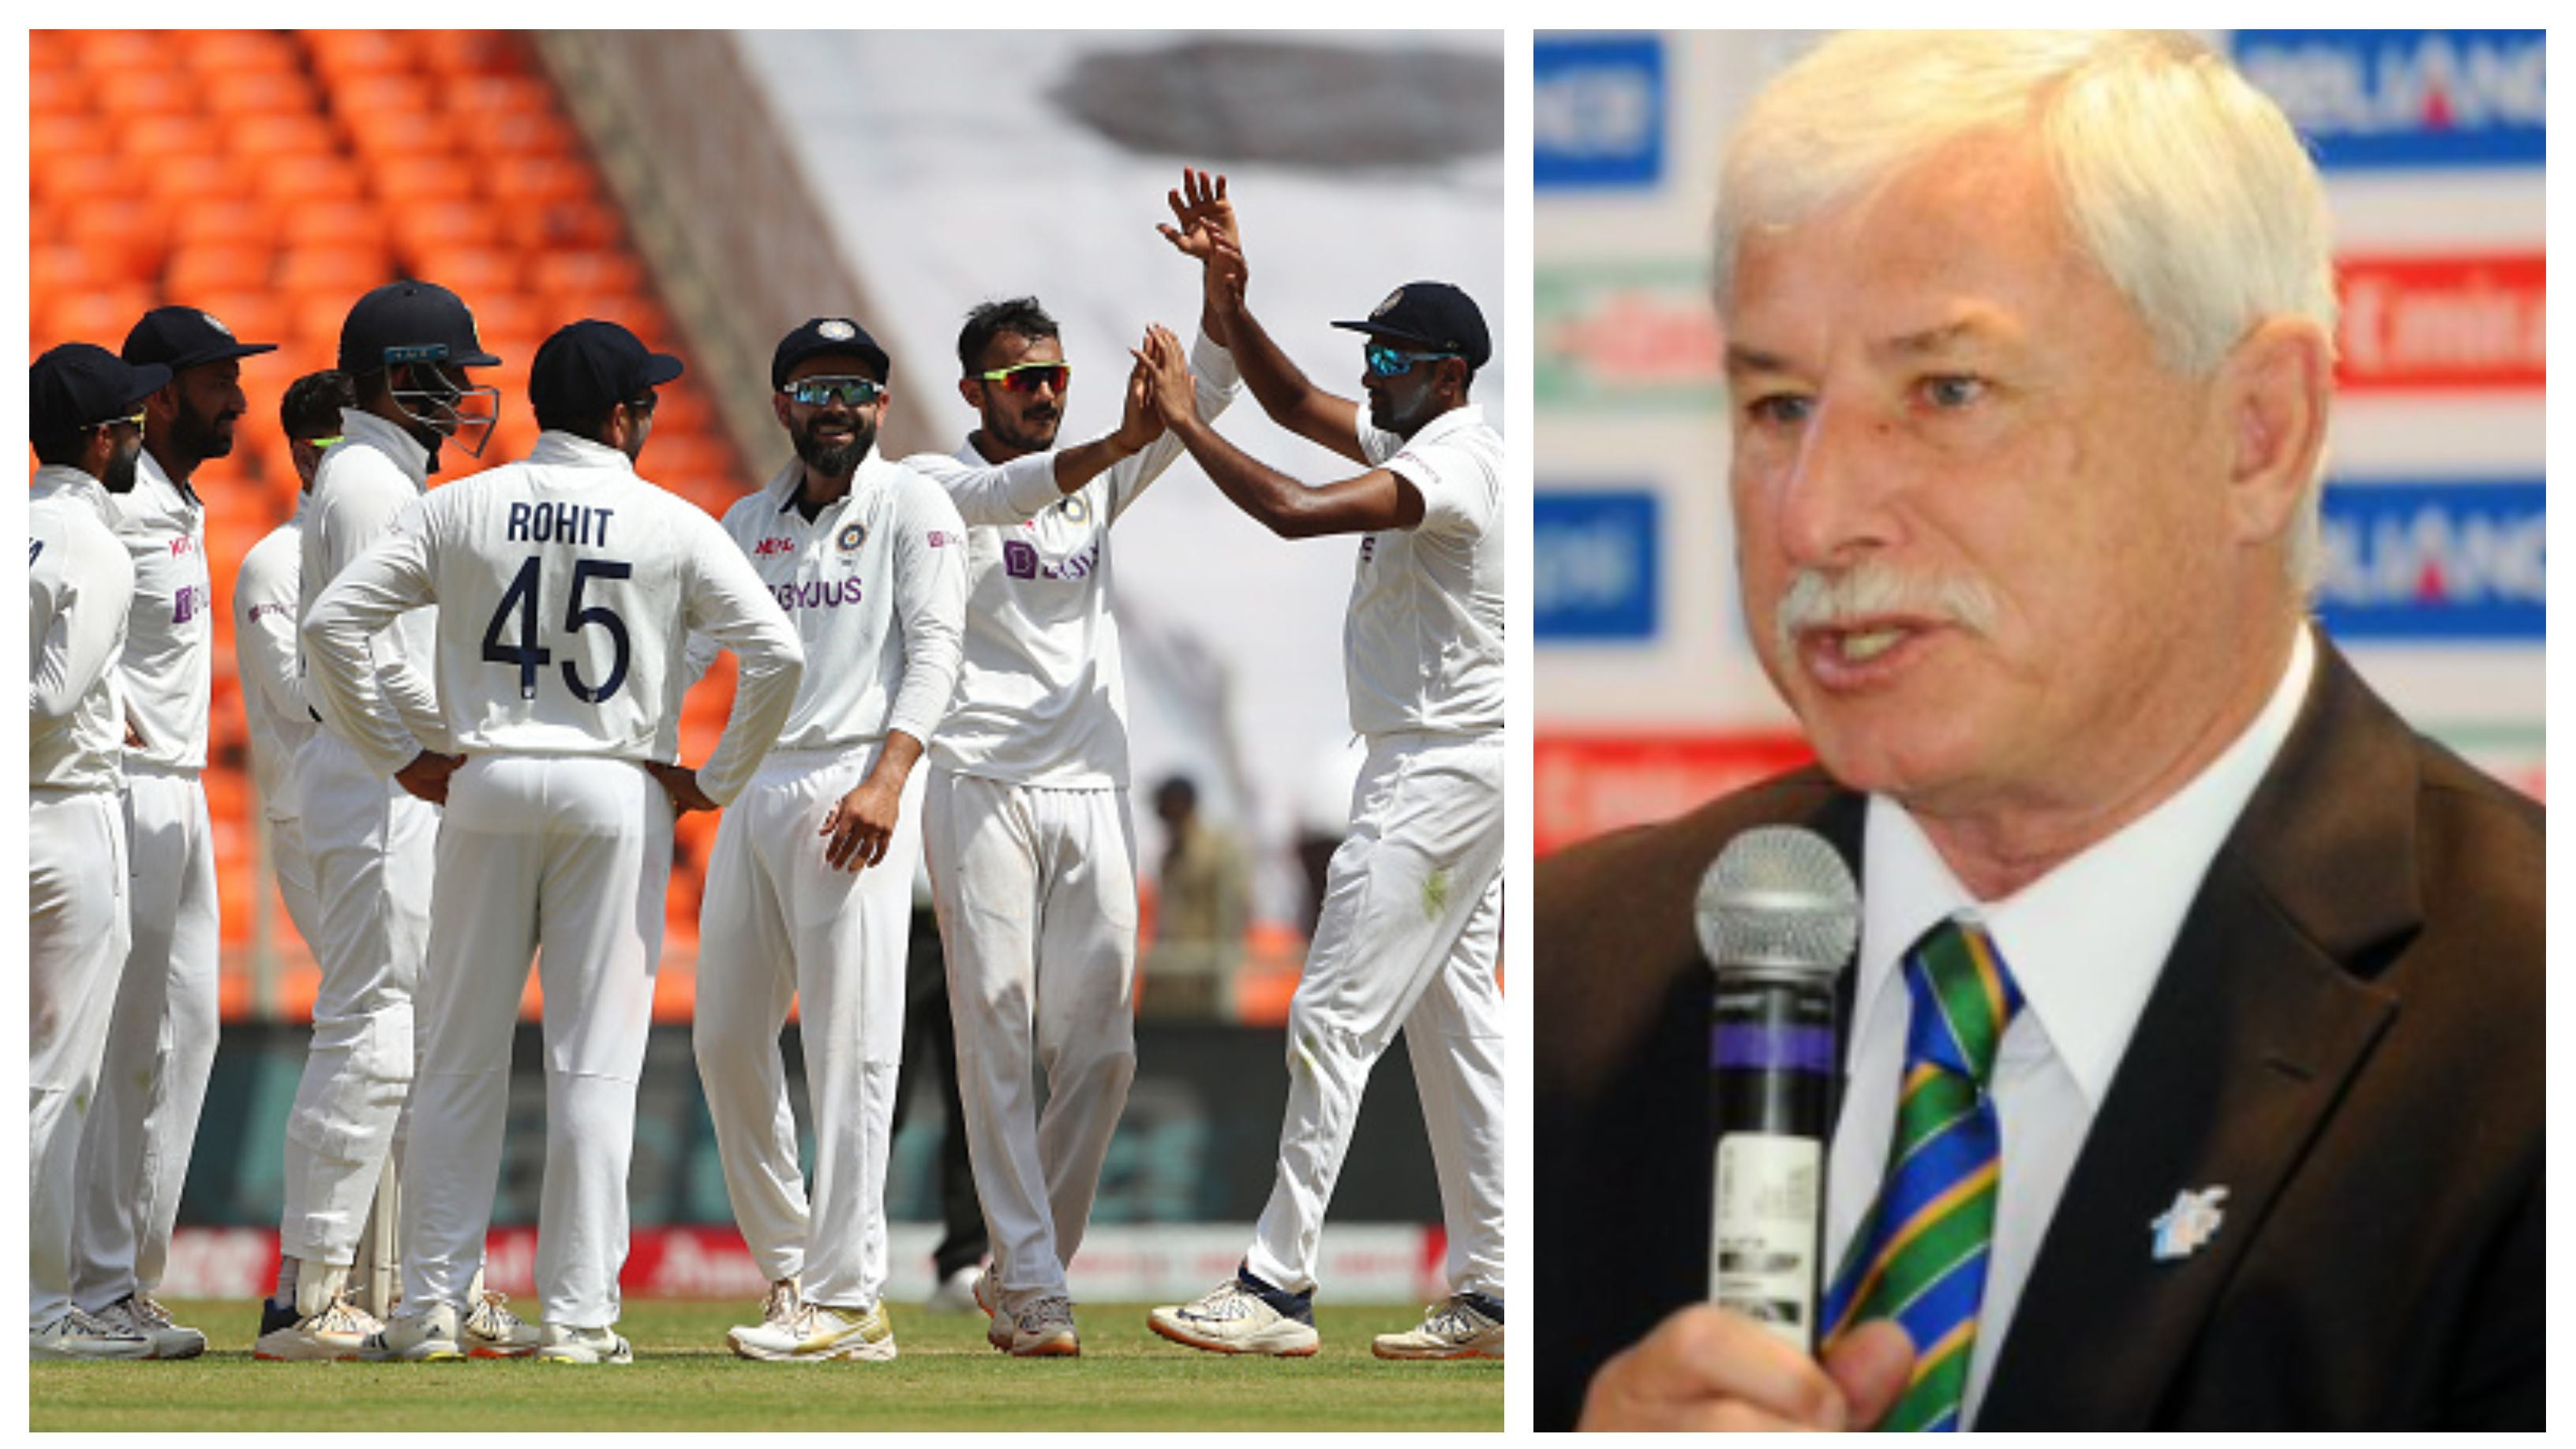 Richard Hadlee acknowledges India’s “outstanding contribution” to Test cricket